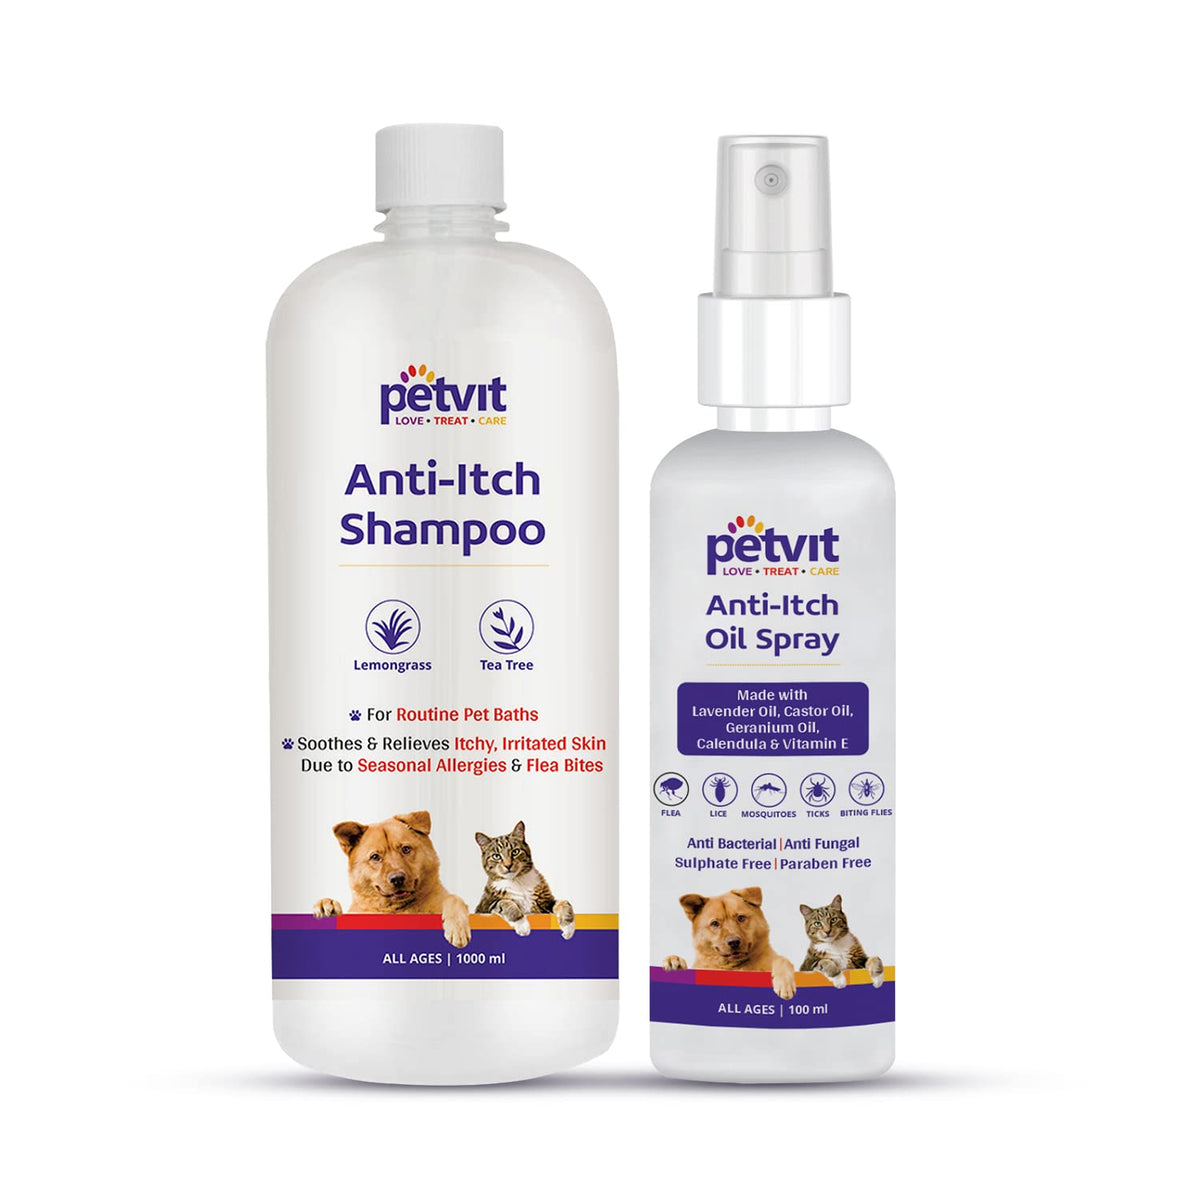 Petvit Anti Itch Shampoo with Tea Tree Oil & Lemon Grass Oil - 1000ml & Anti-Itch Oil Spray with Vitamin E, Lavender Oil & Castor Oil - for All Breed Dog & Cat – 100ml (Combo)